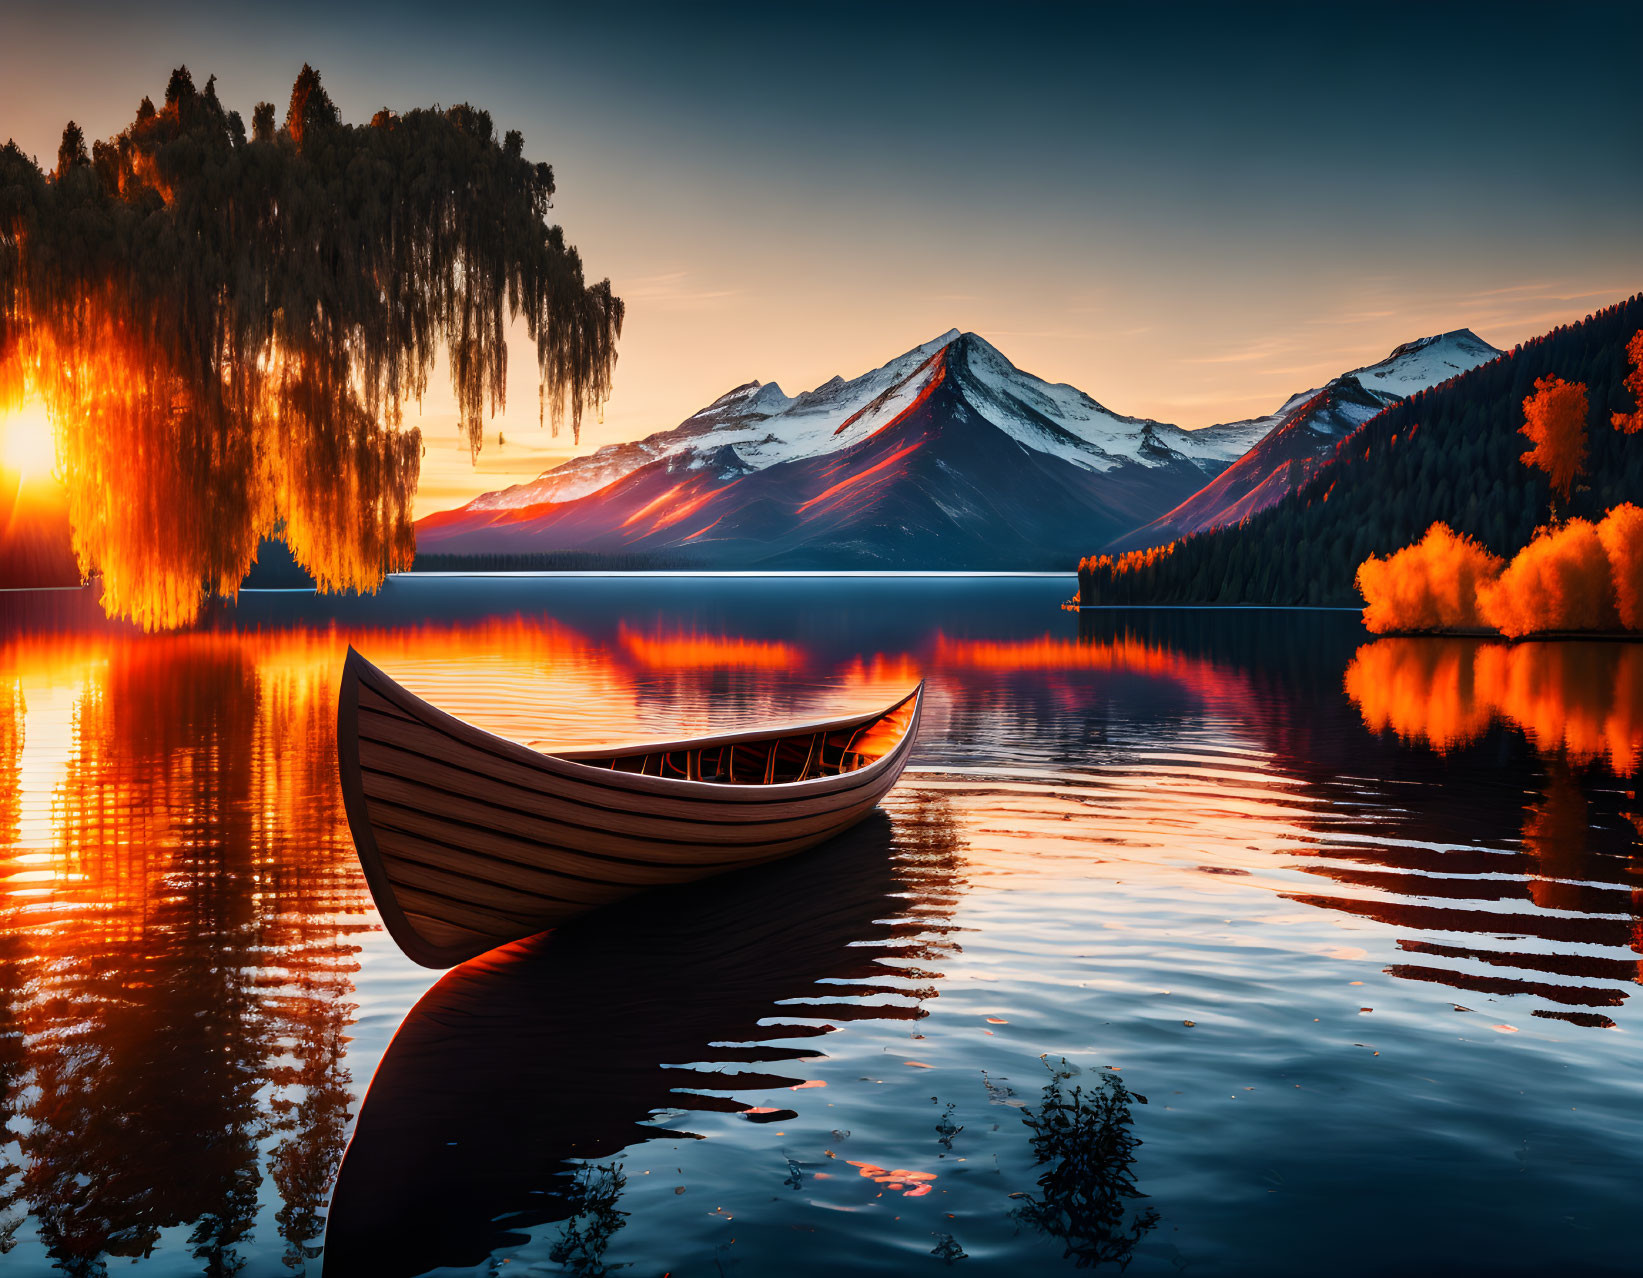 Tranquil sunset scene: boat, autumn trees, snow-capped mountains